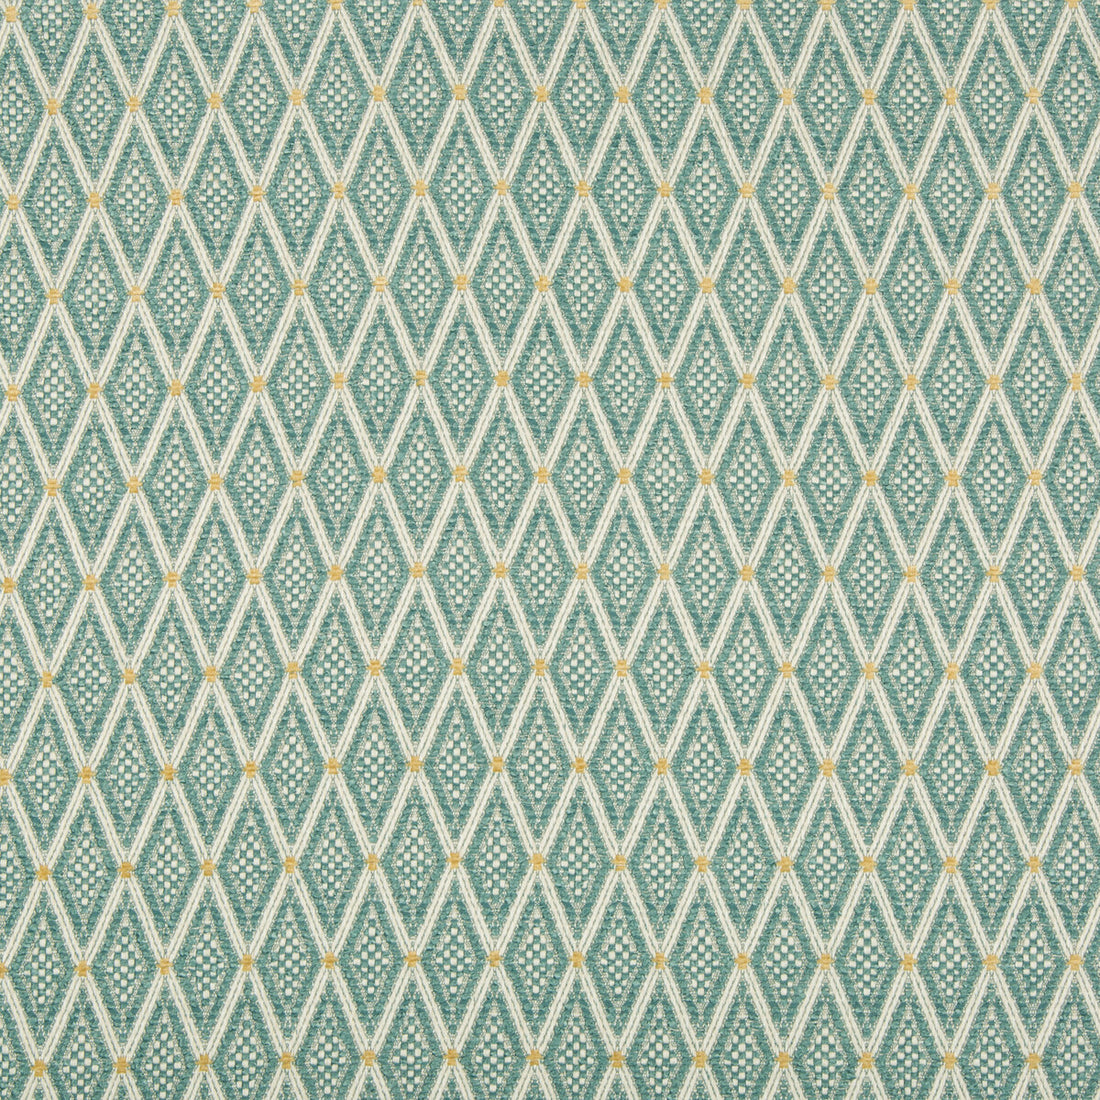 Kravet Contract fabric in 34744-35 color - pattern 34744.35.0 - by Kravet Contract in the Crypton Incase collection